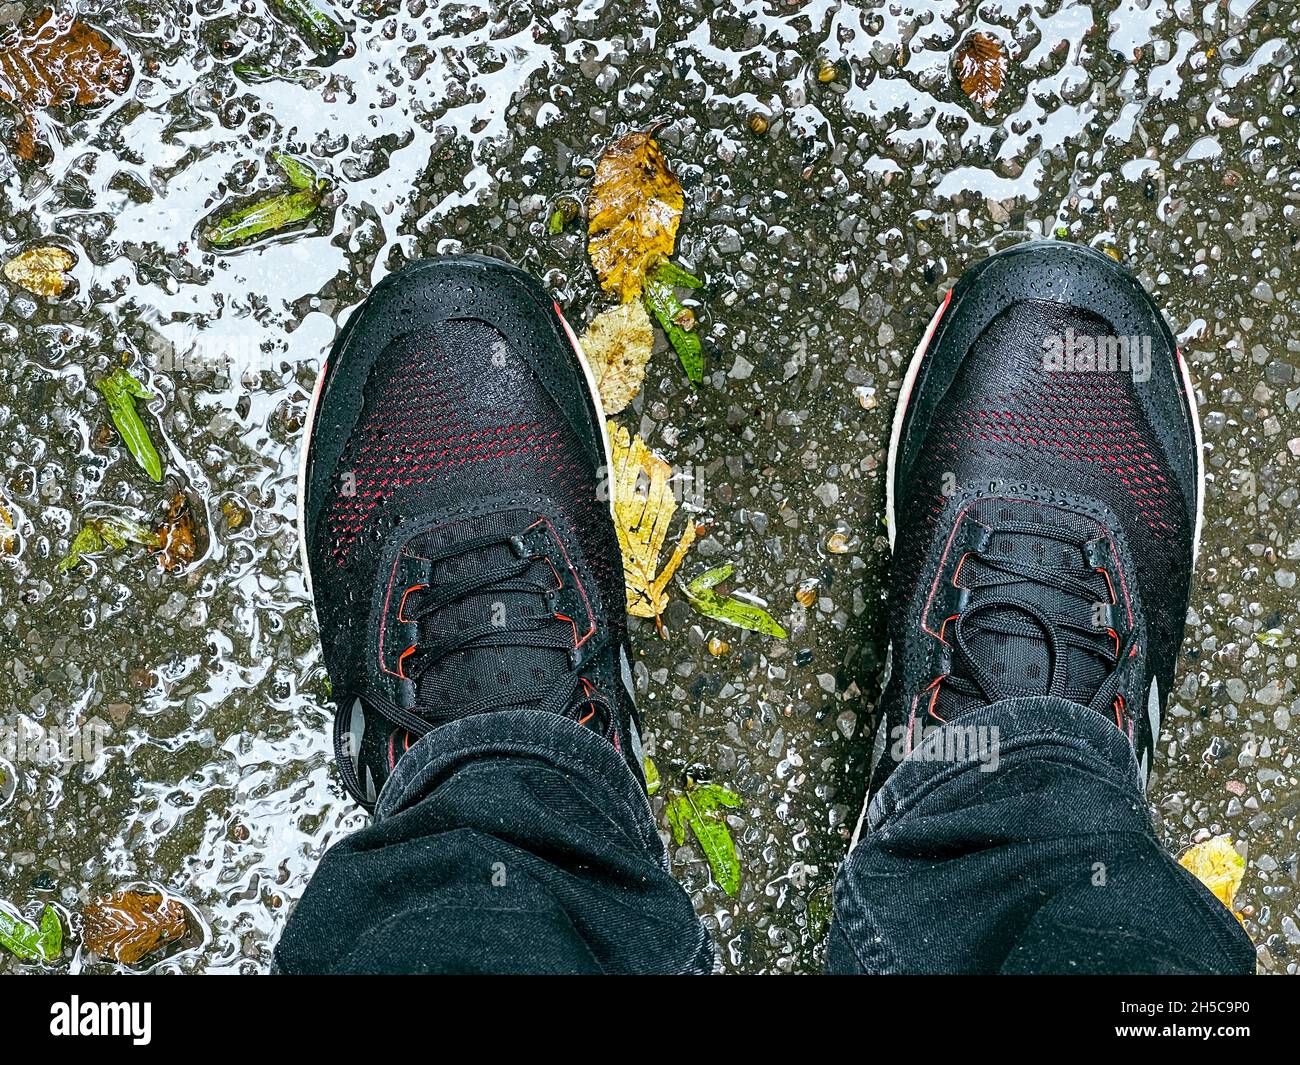 Shoes on the asphalt and lots of rainwater. Stock Photo